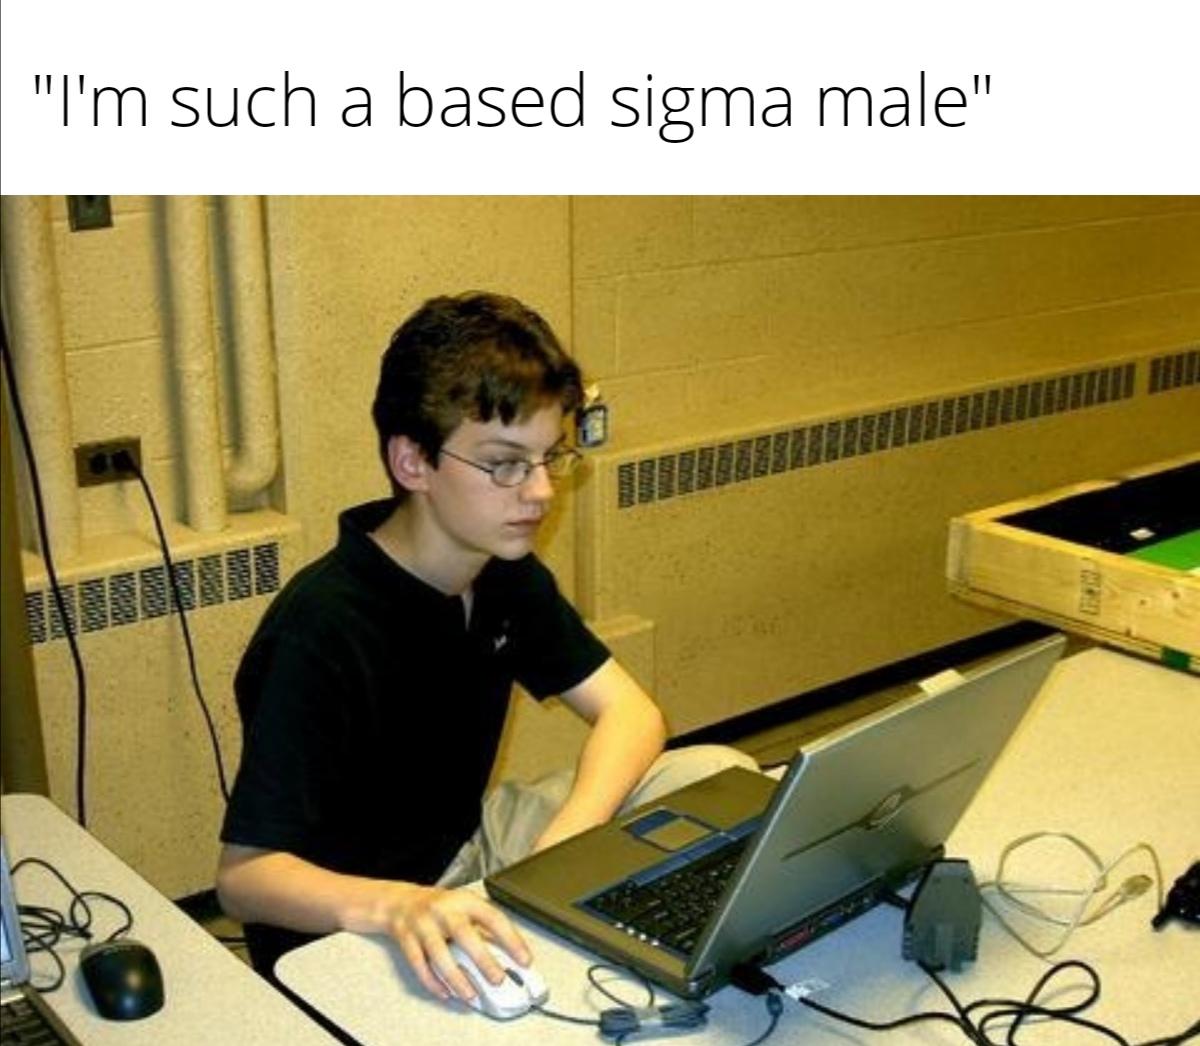 hey man leave her alone - "I'm such a based sigma male"